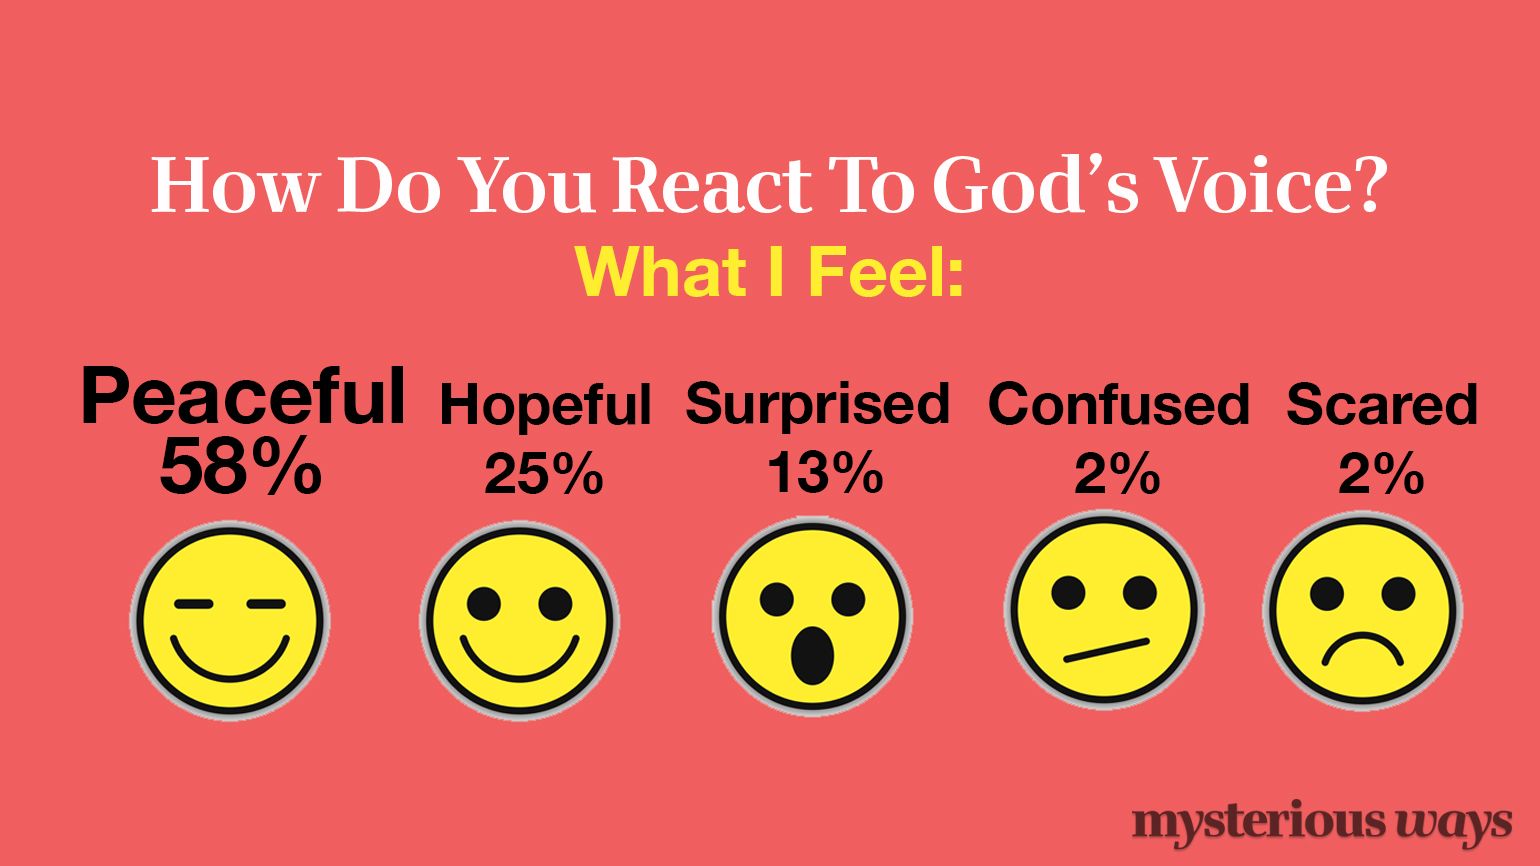 How Do You React To God's Voice? What I Feel.